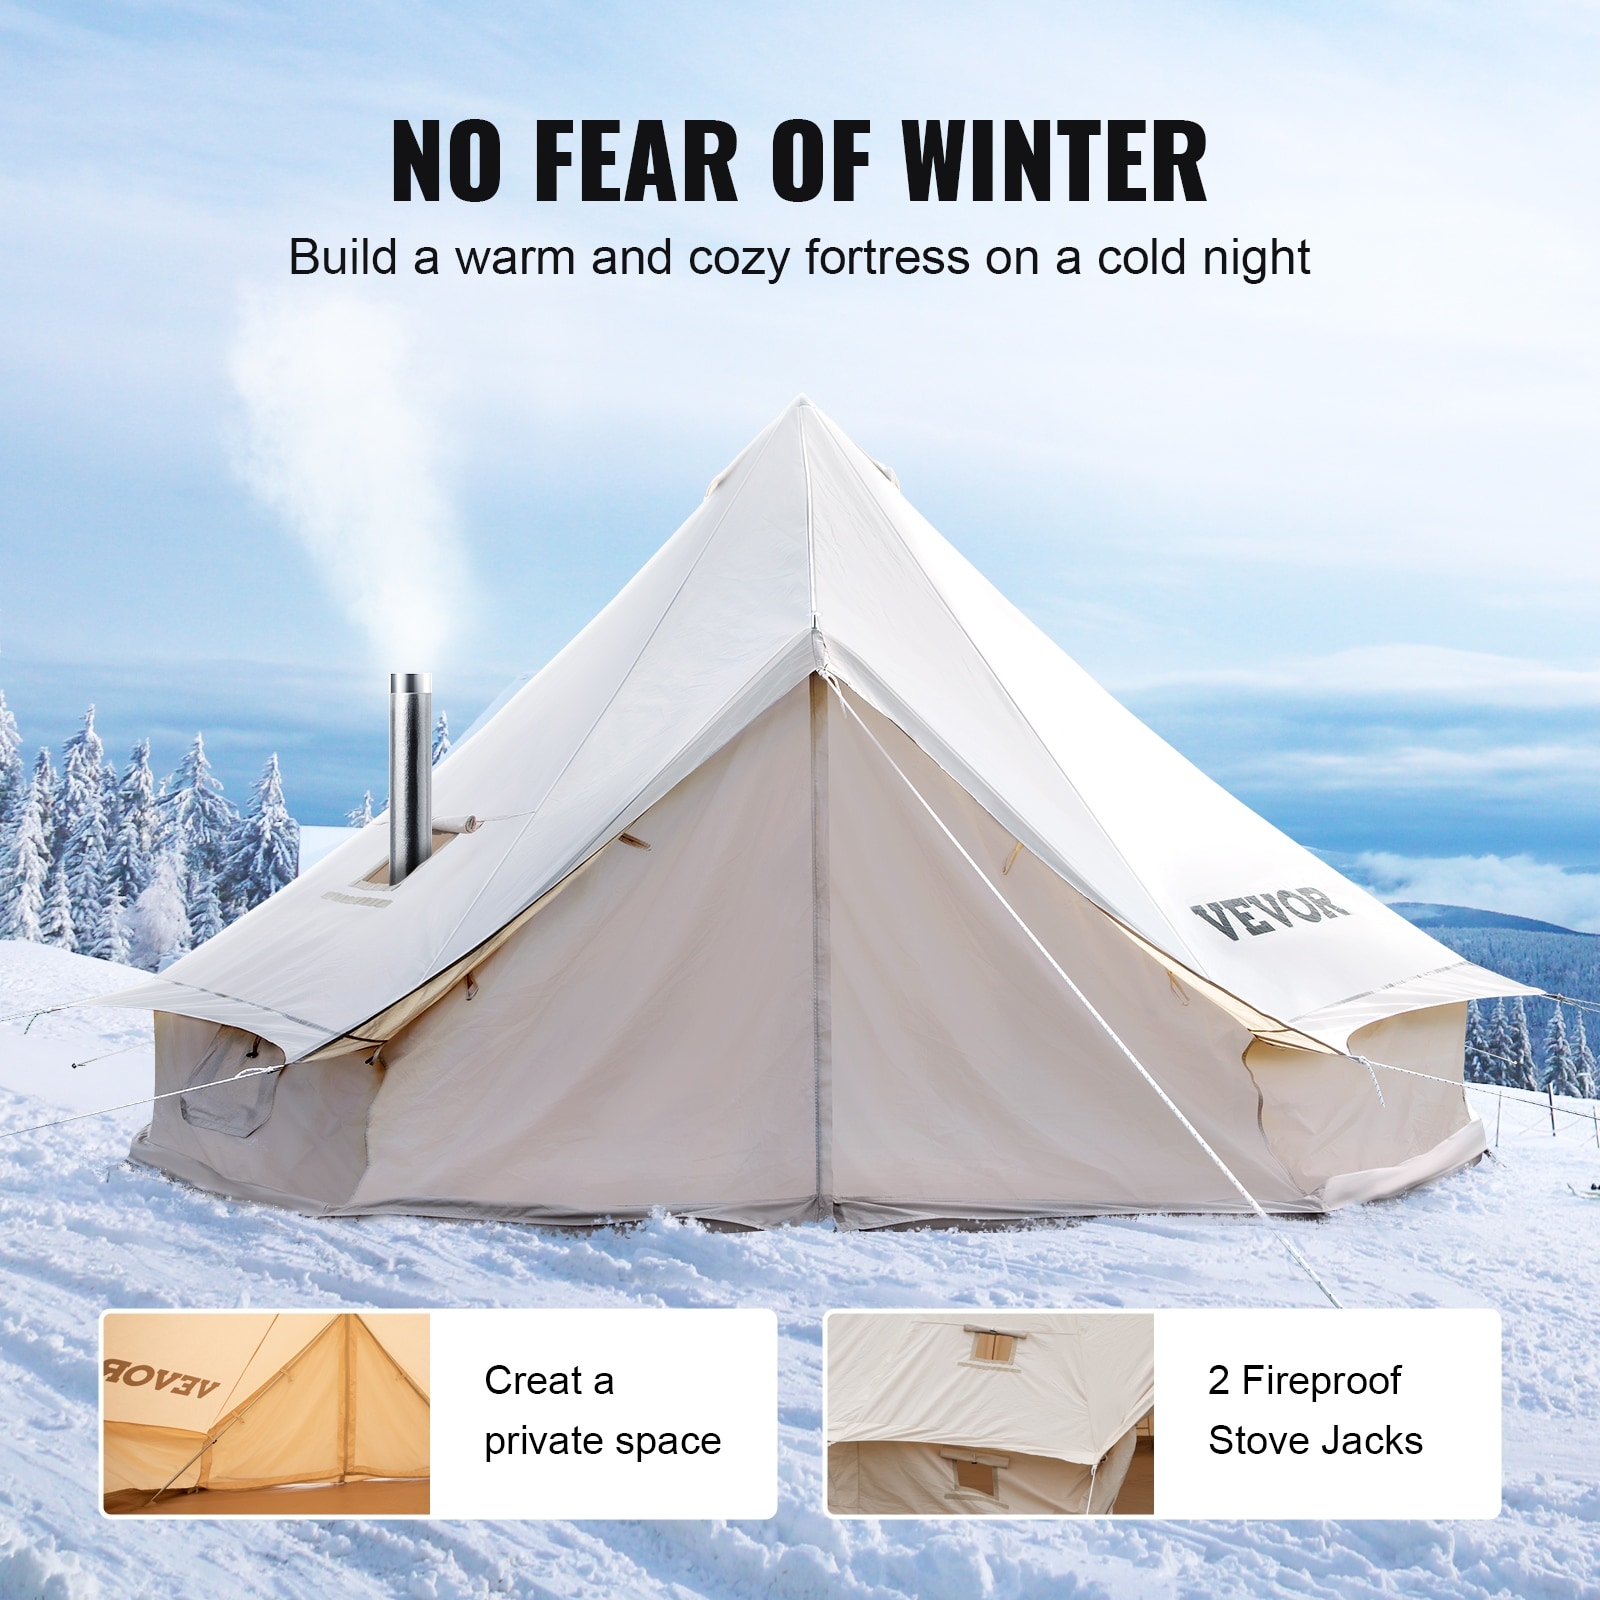 VEVOR 12-Person Waterproof Canvas Bell Tent 19 ft.in Dia. 100% Cotton Canvas Yurt Tent House with Stove Jack in 4 Seasons